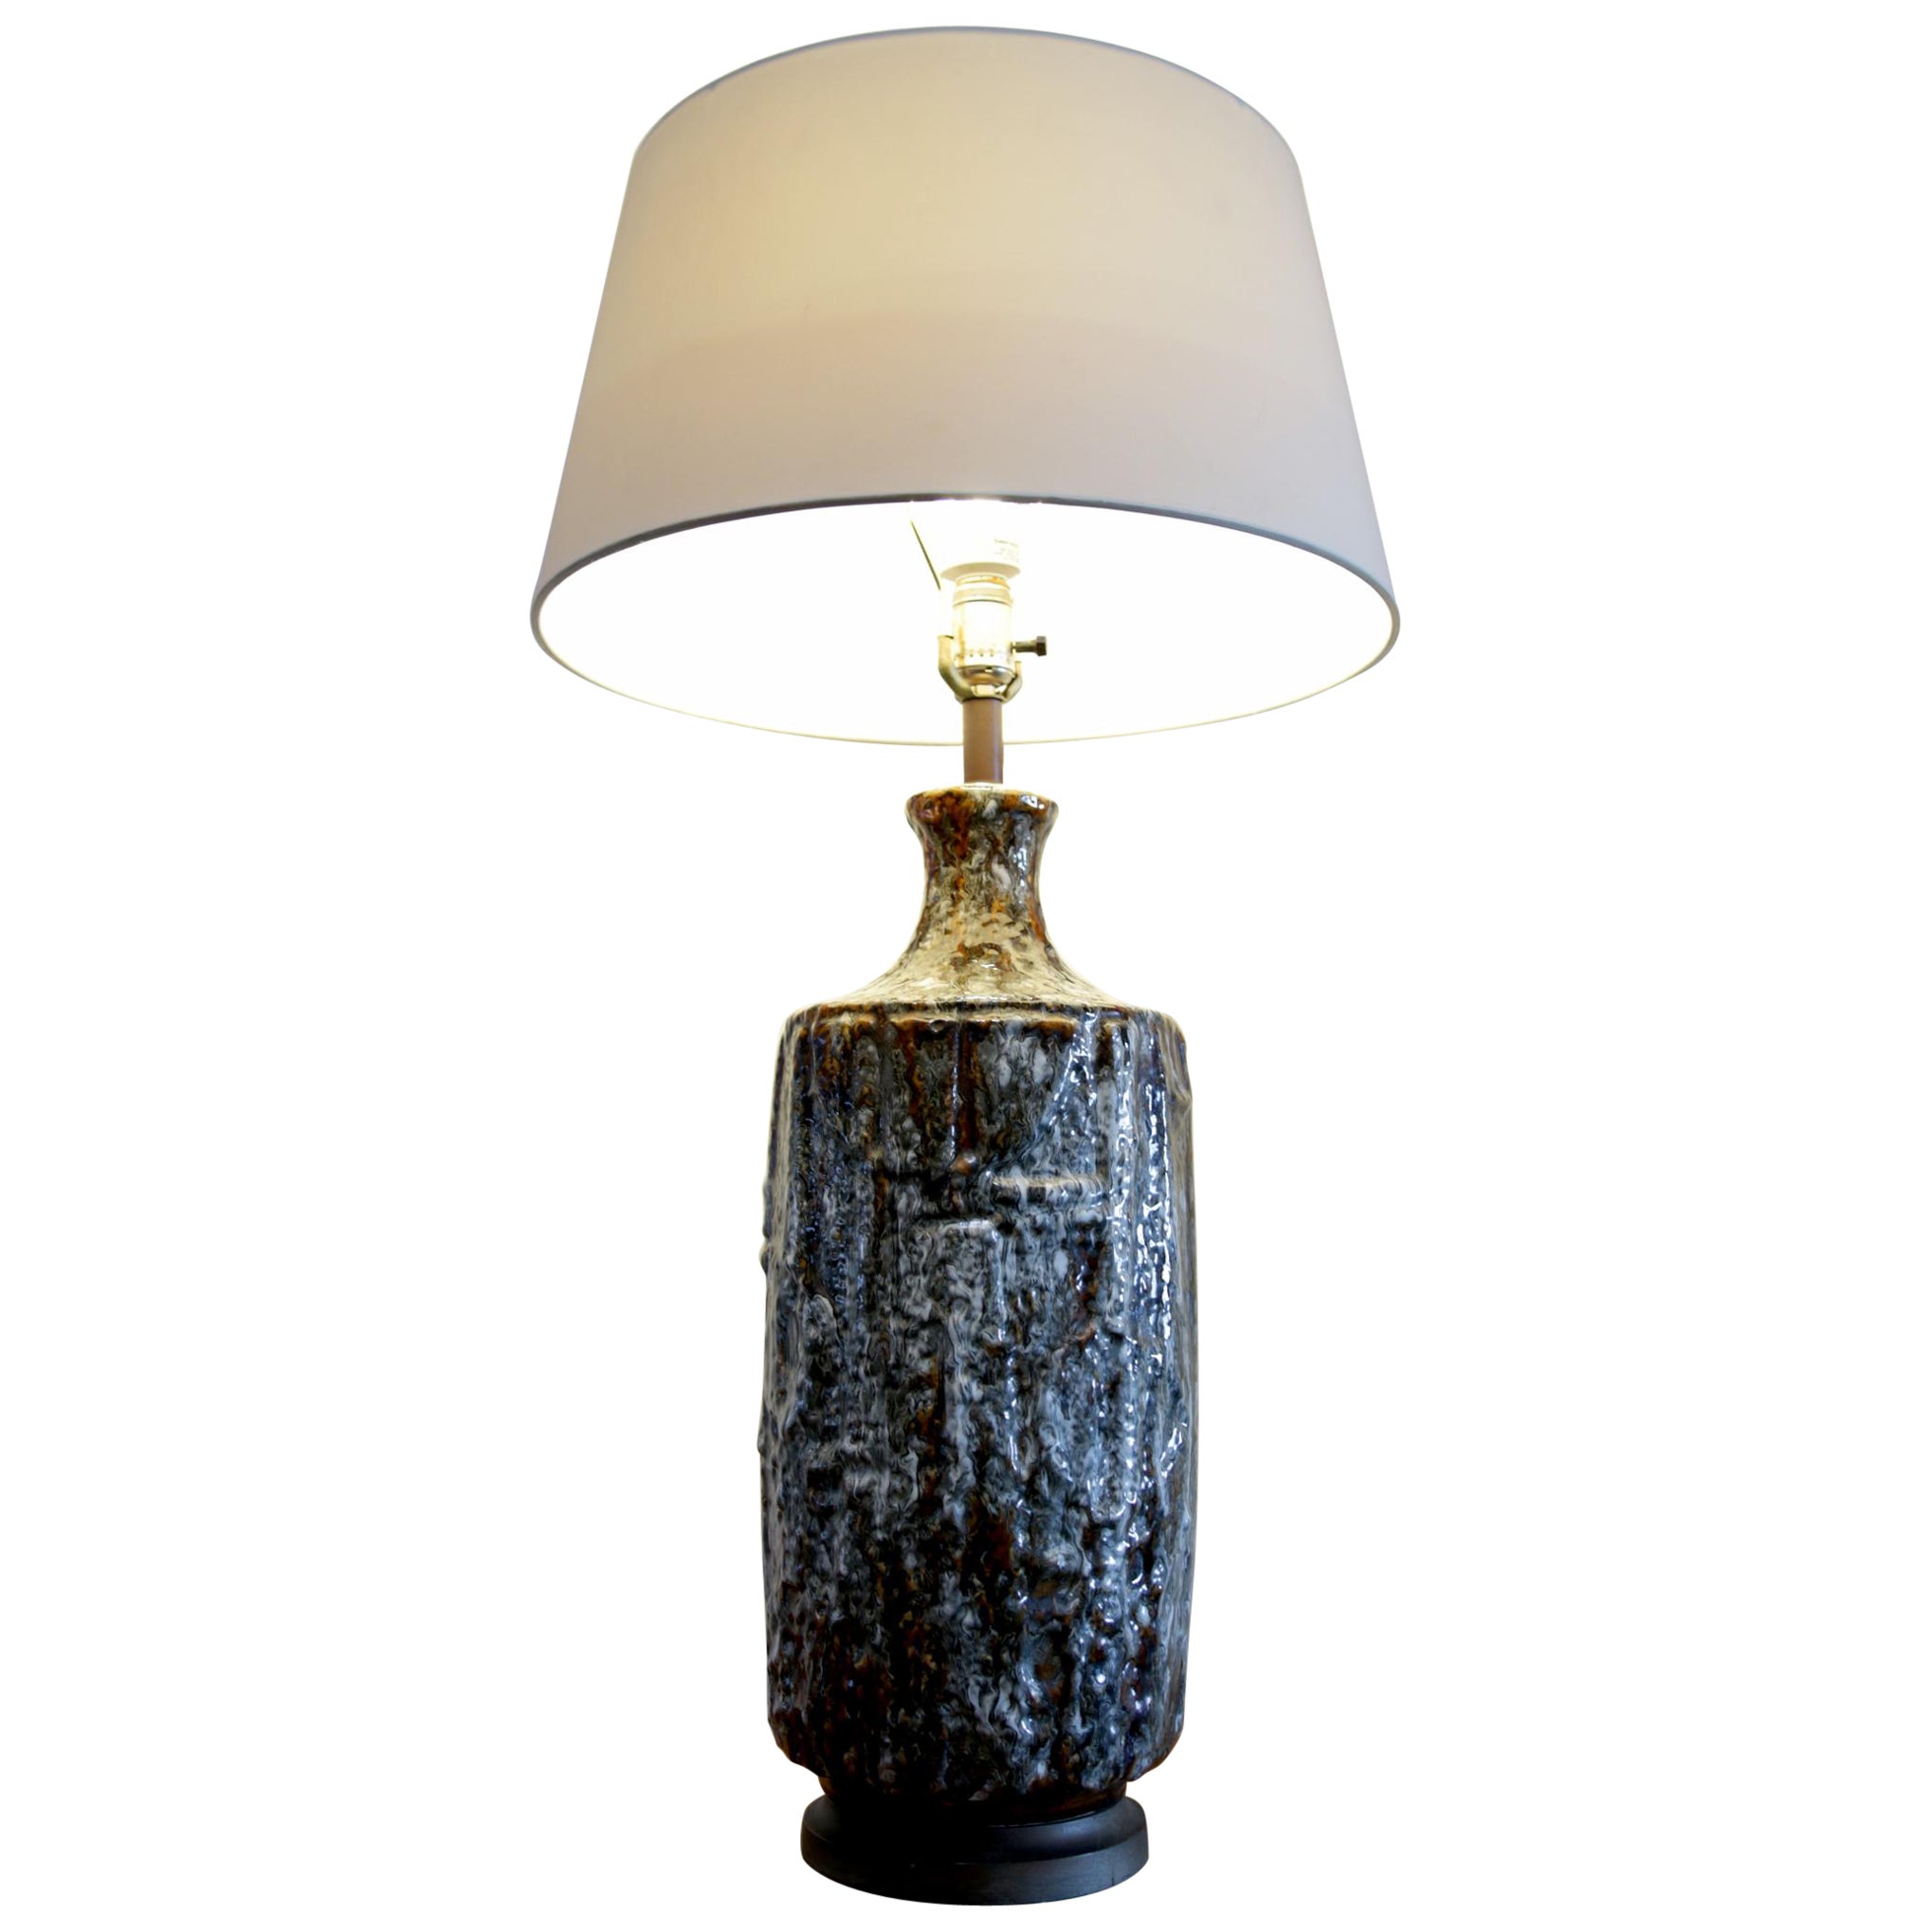 Vintage Drip Glaze Root Beer Float Brown and White Ceramic Table Lamp 